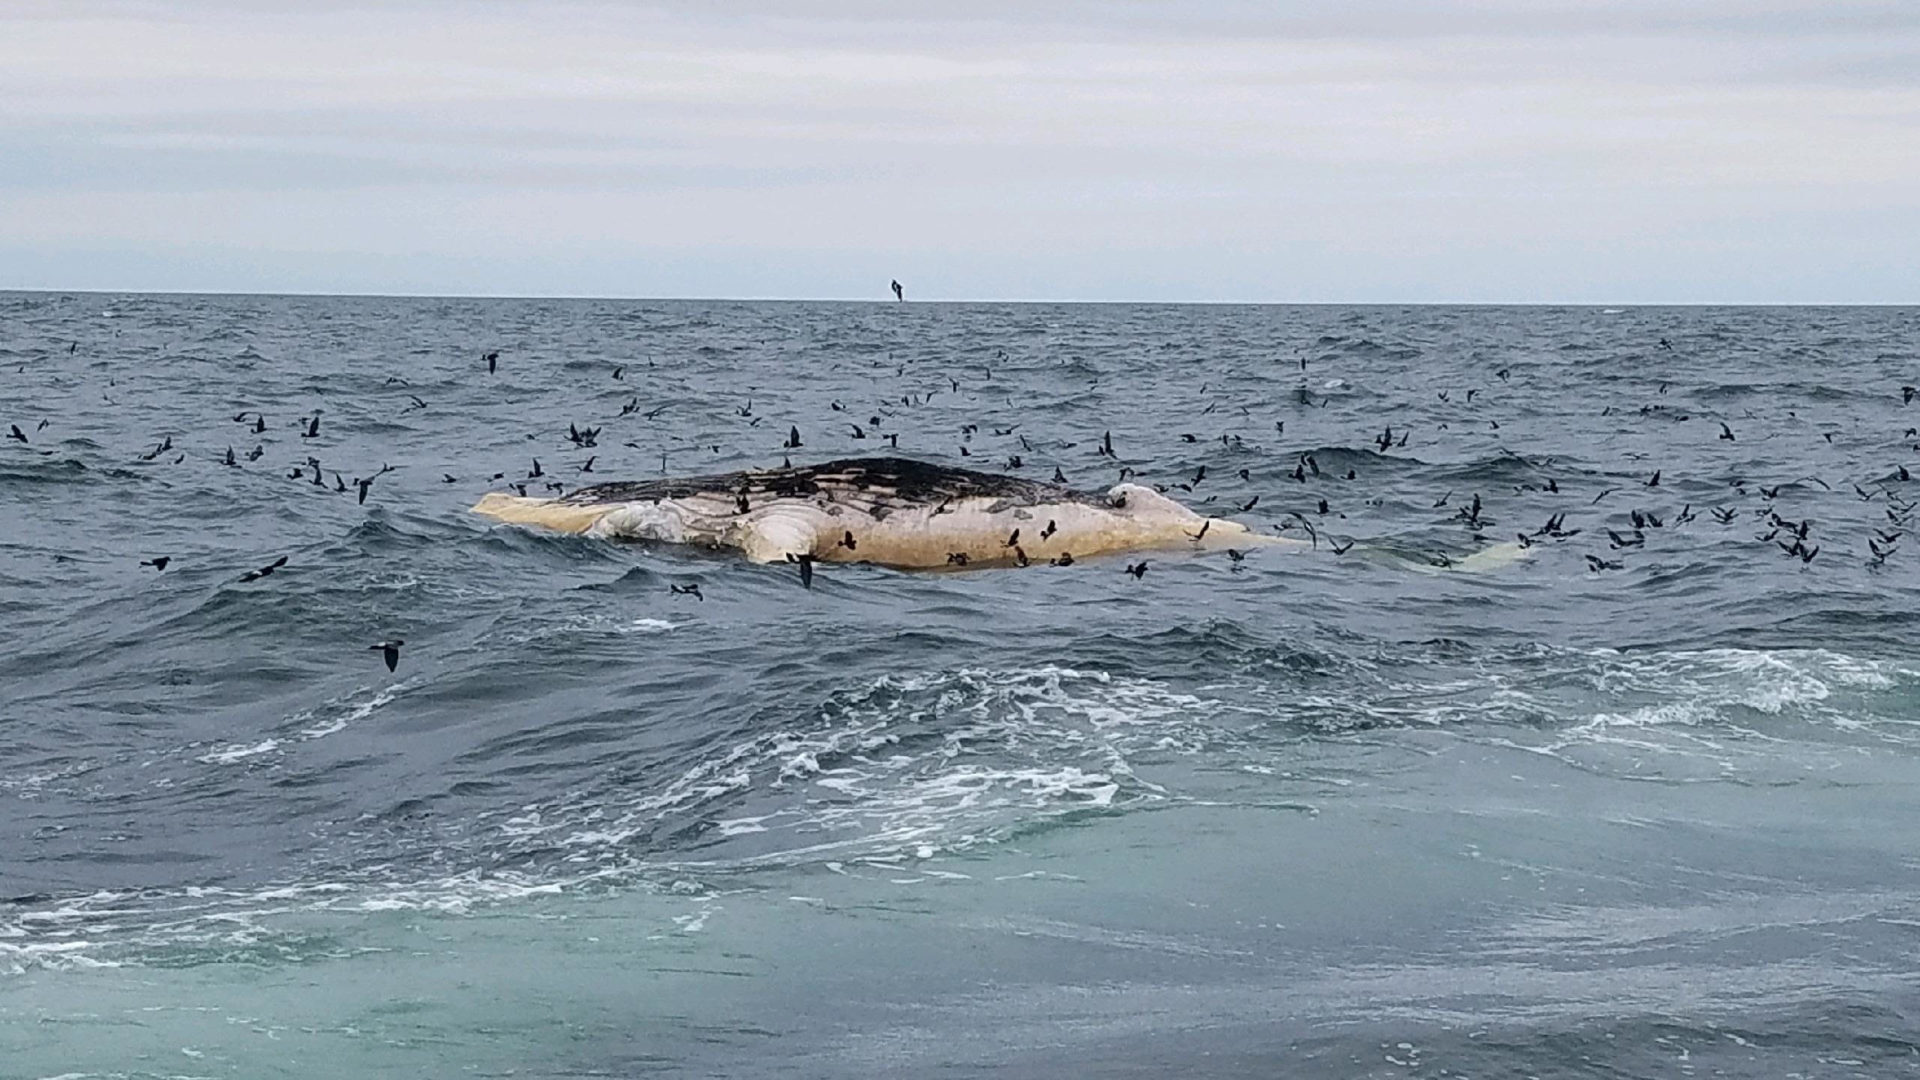 The dead whale was about 4.5 miles off Montauk